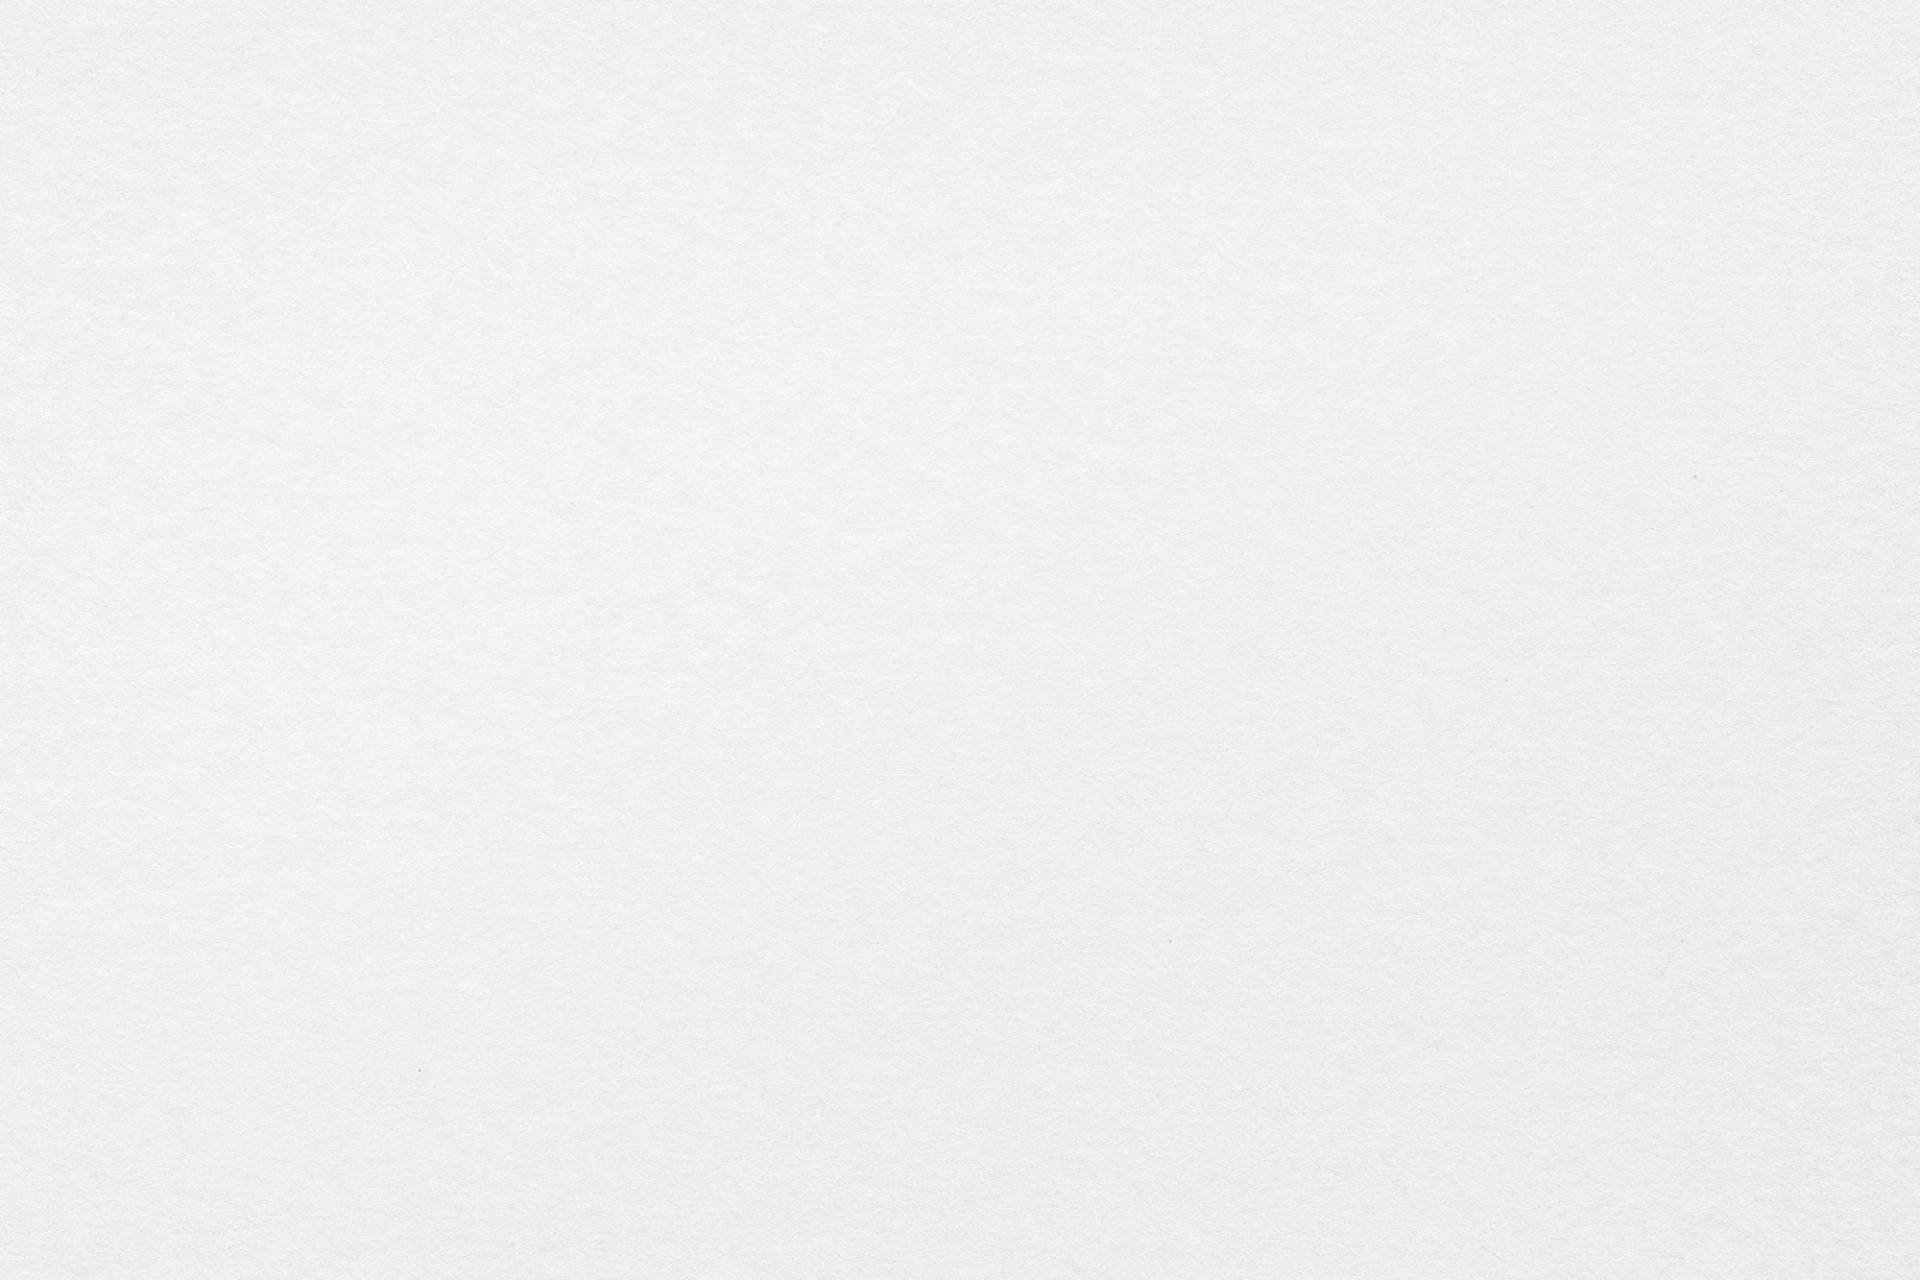 Caption: Soothing Simplicity: Pure White Hd Wallpaper Background